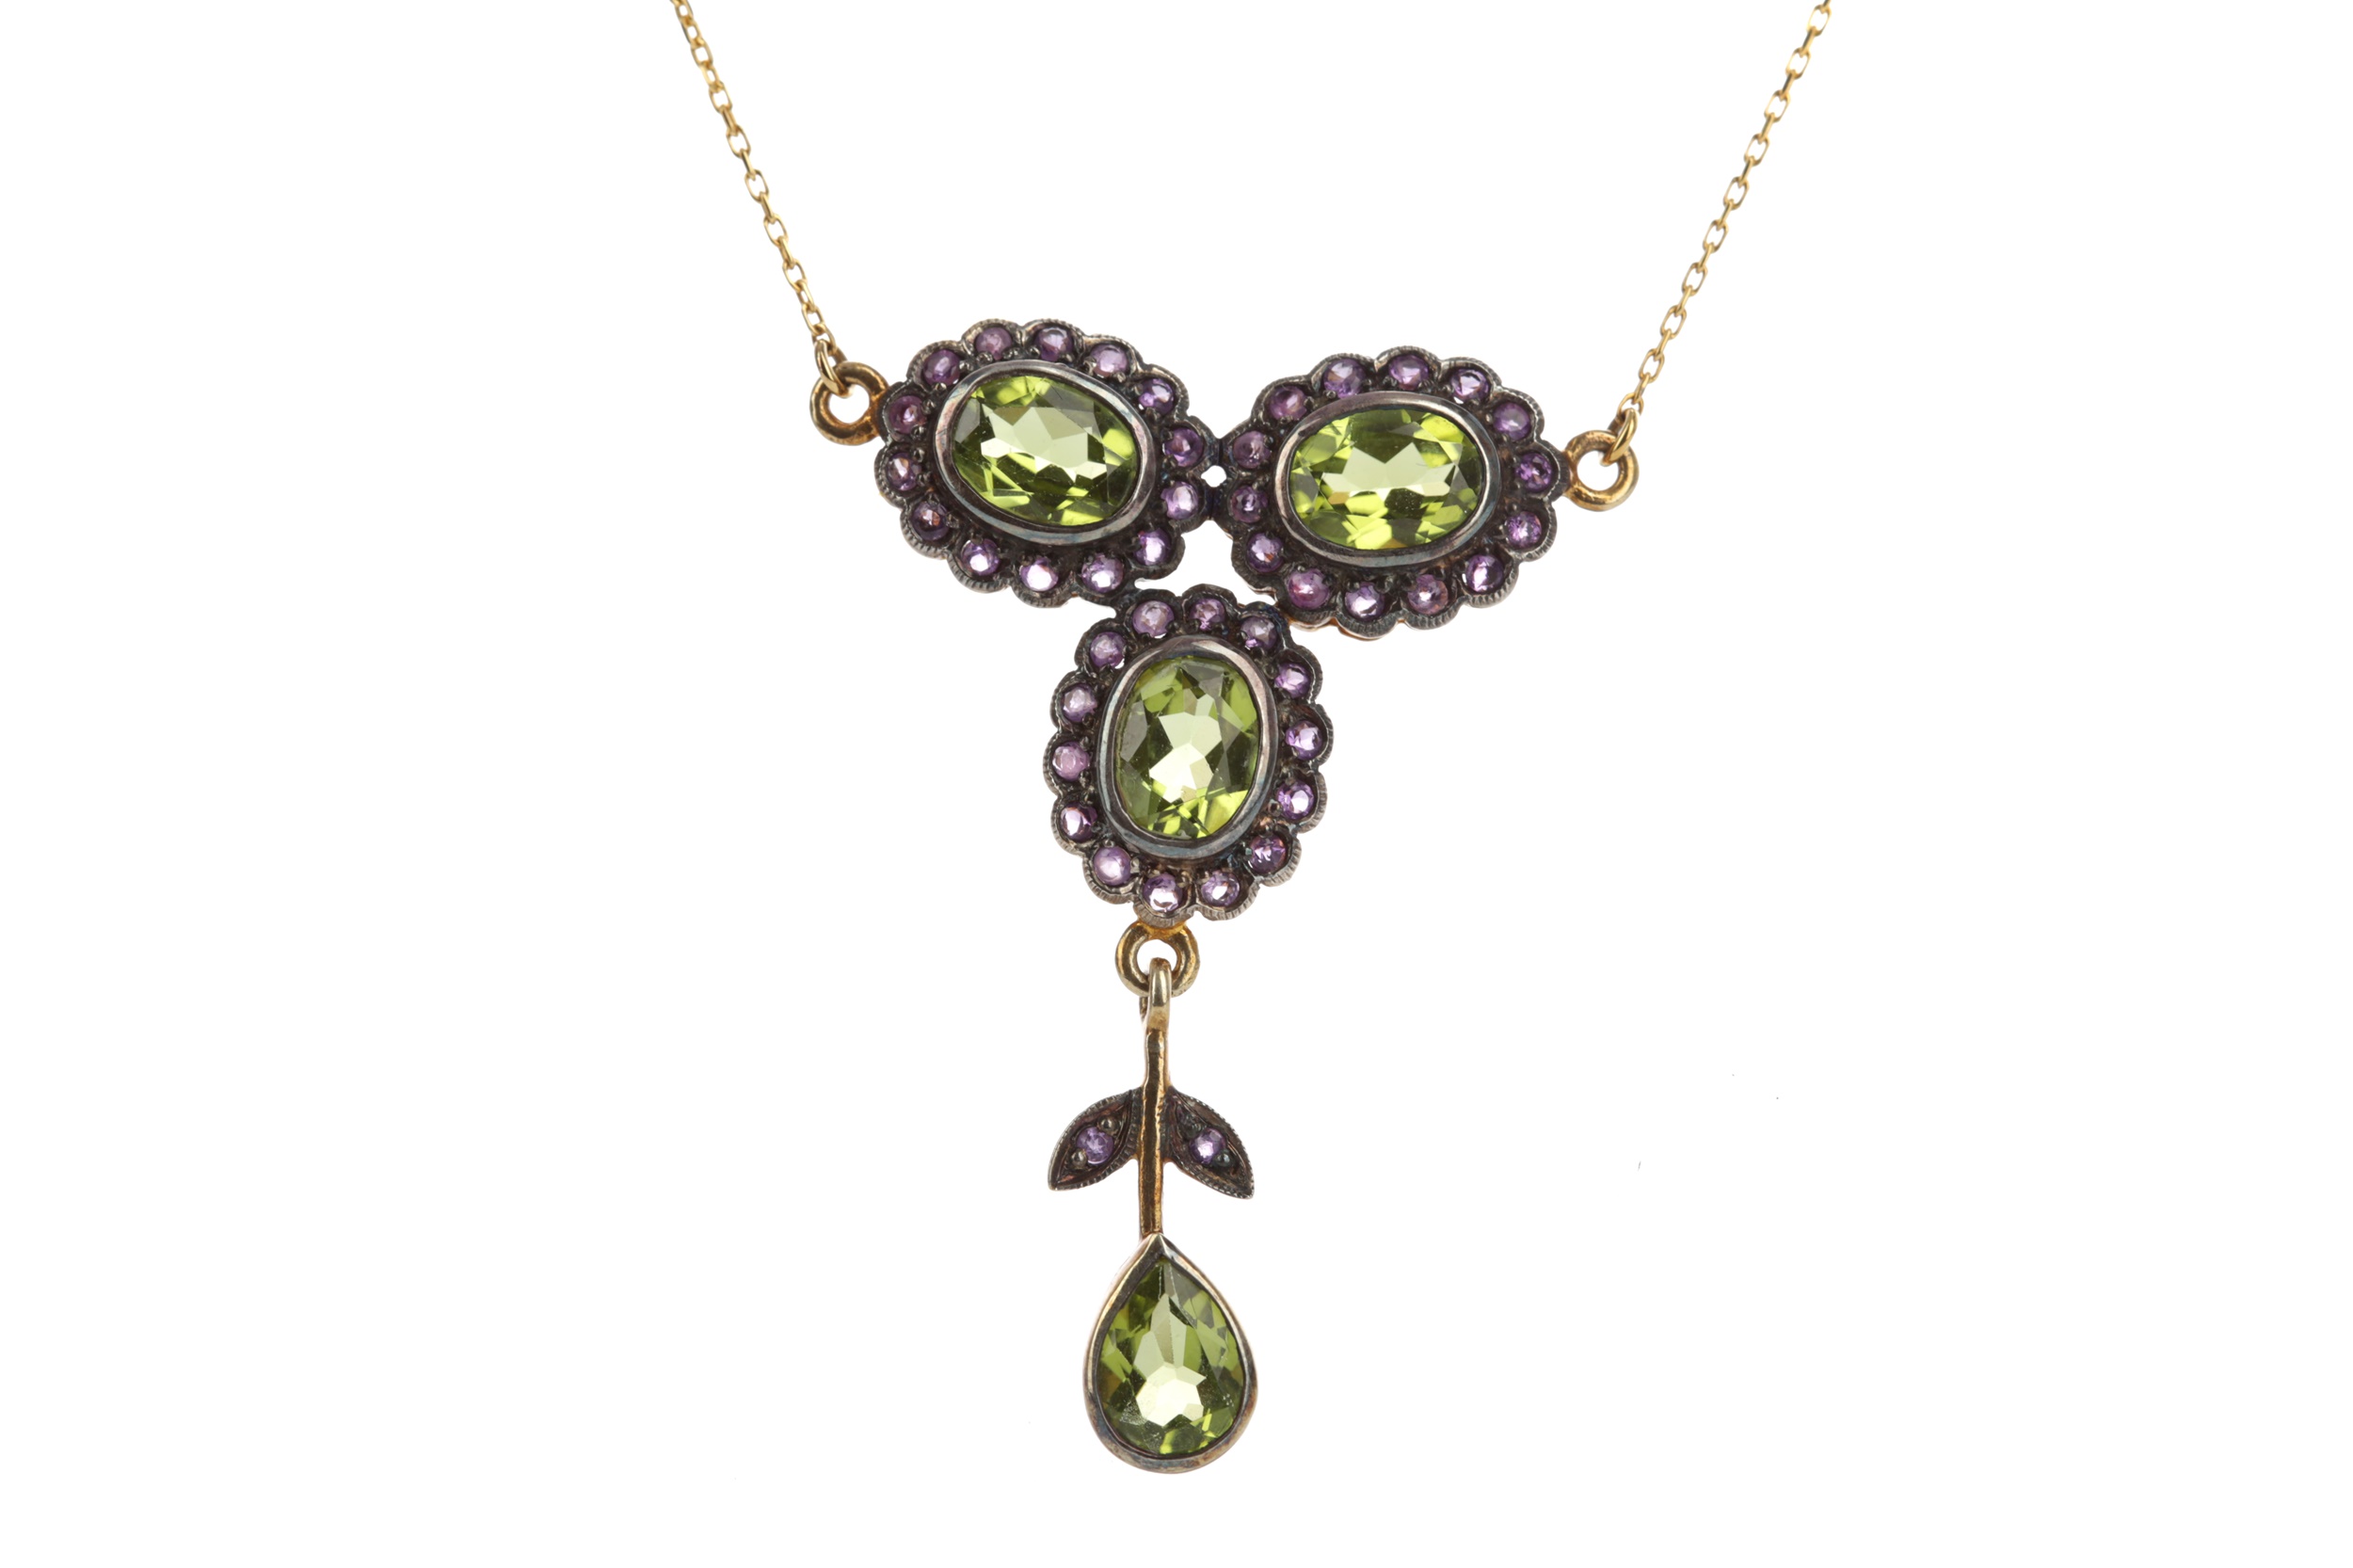 A PERIDOT AND AMETHYST NECKLET